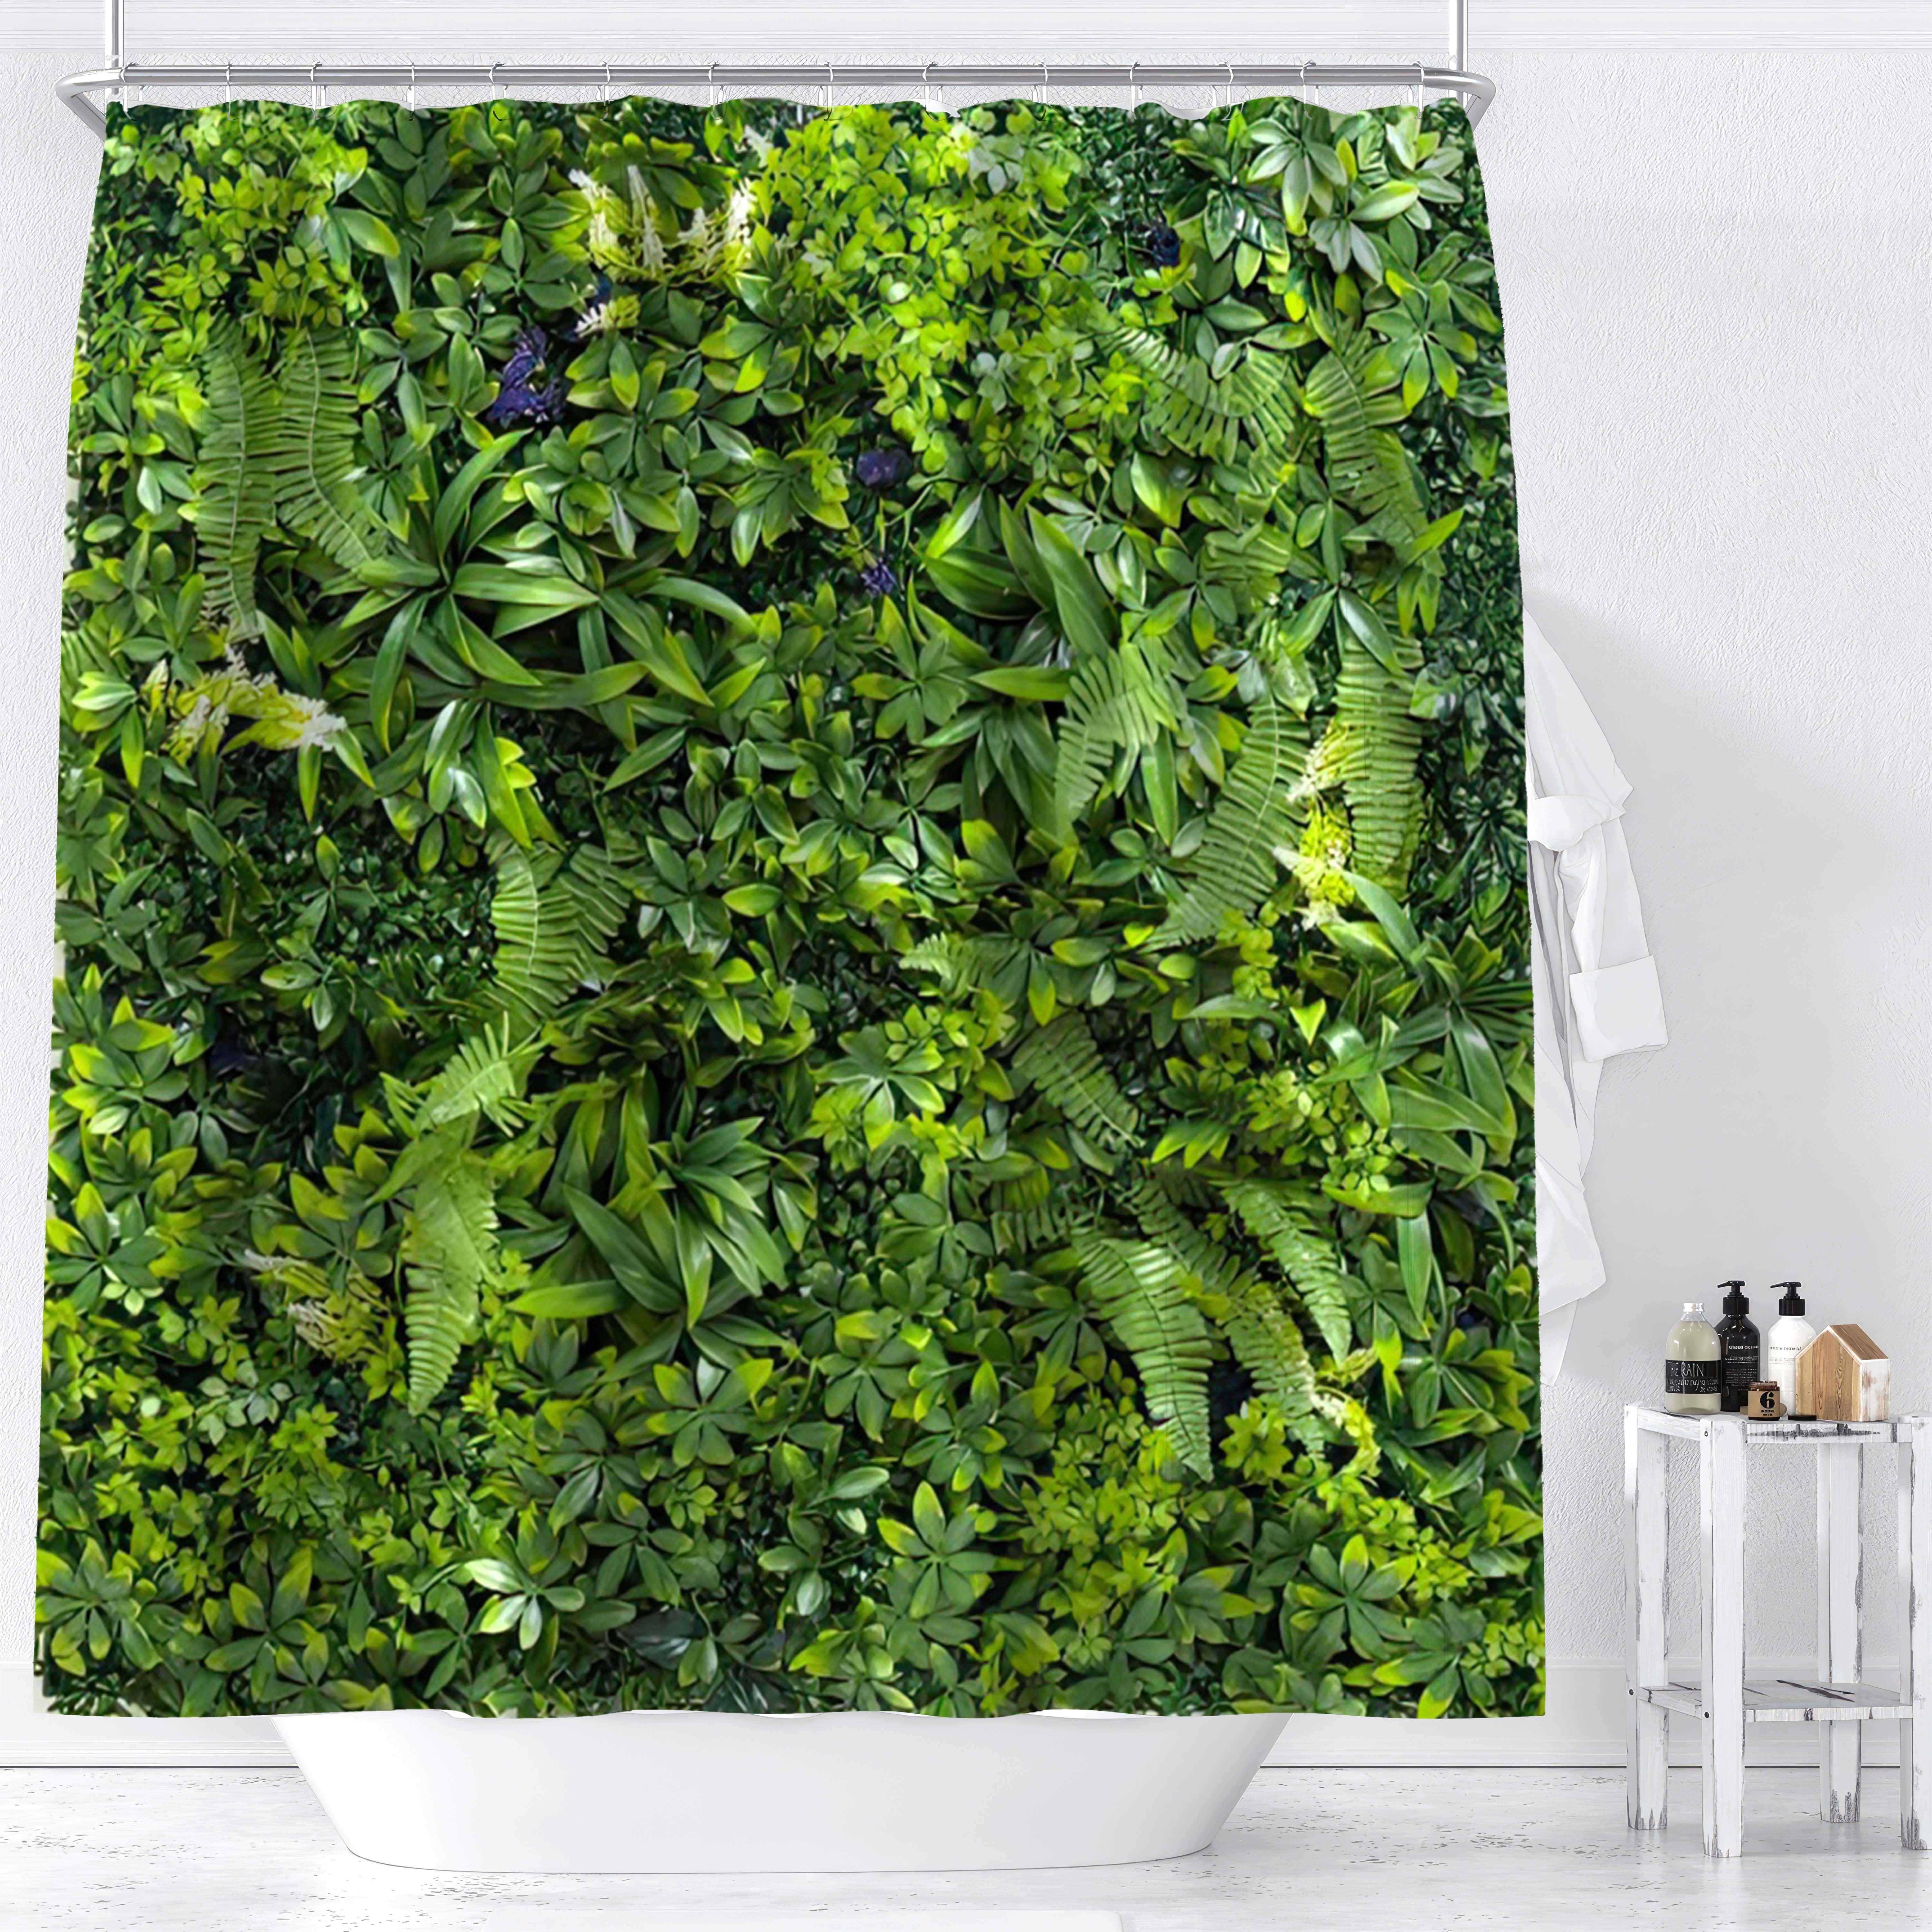 

Ywjhui Leaf Pattern Digital Print Shower Curtain, Water-resistant Polyester Fabric With Hooks, Machine Washable, Knit Weave, All-season Green Leaf Design Curtain For Bathroom Decor